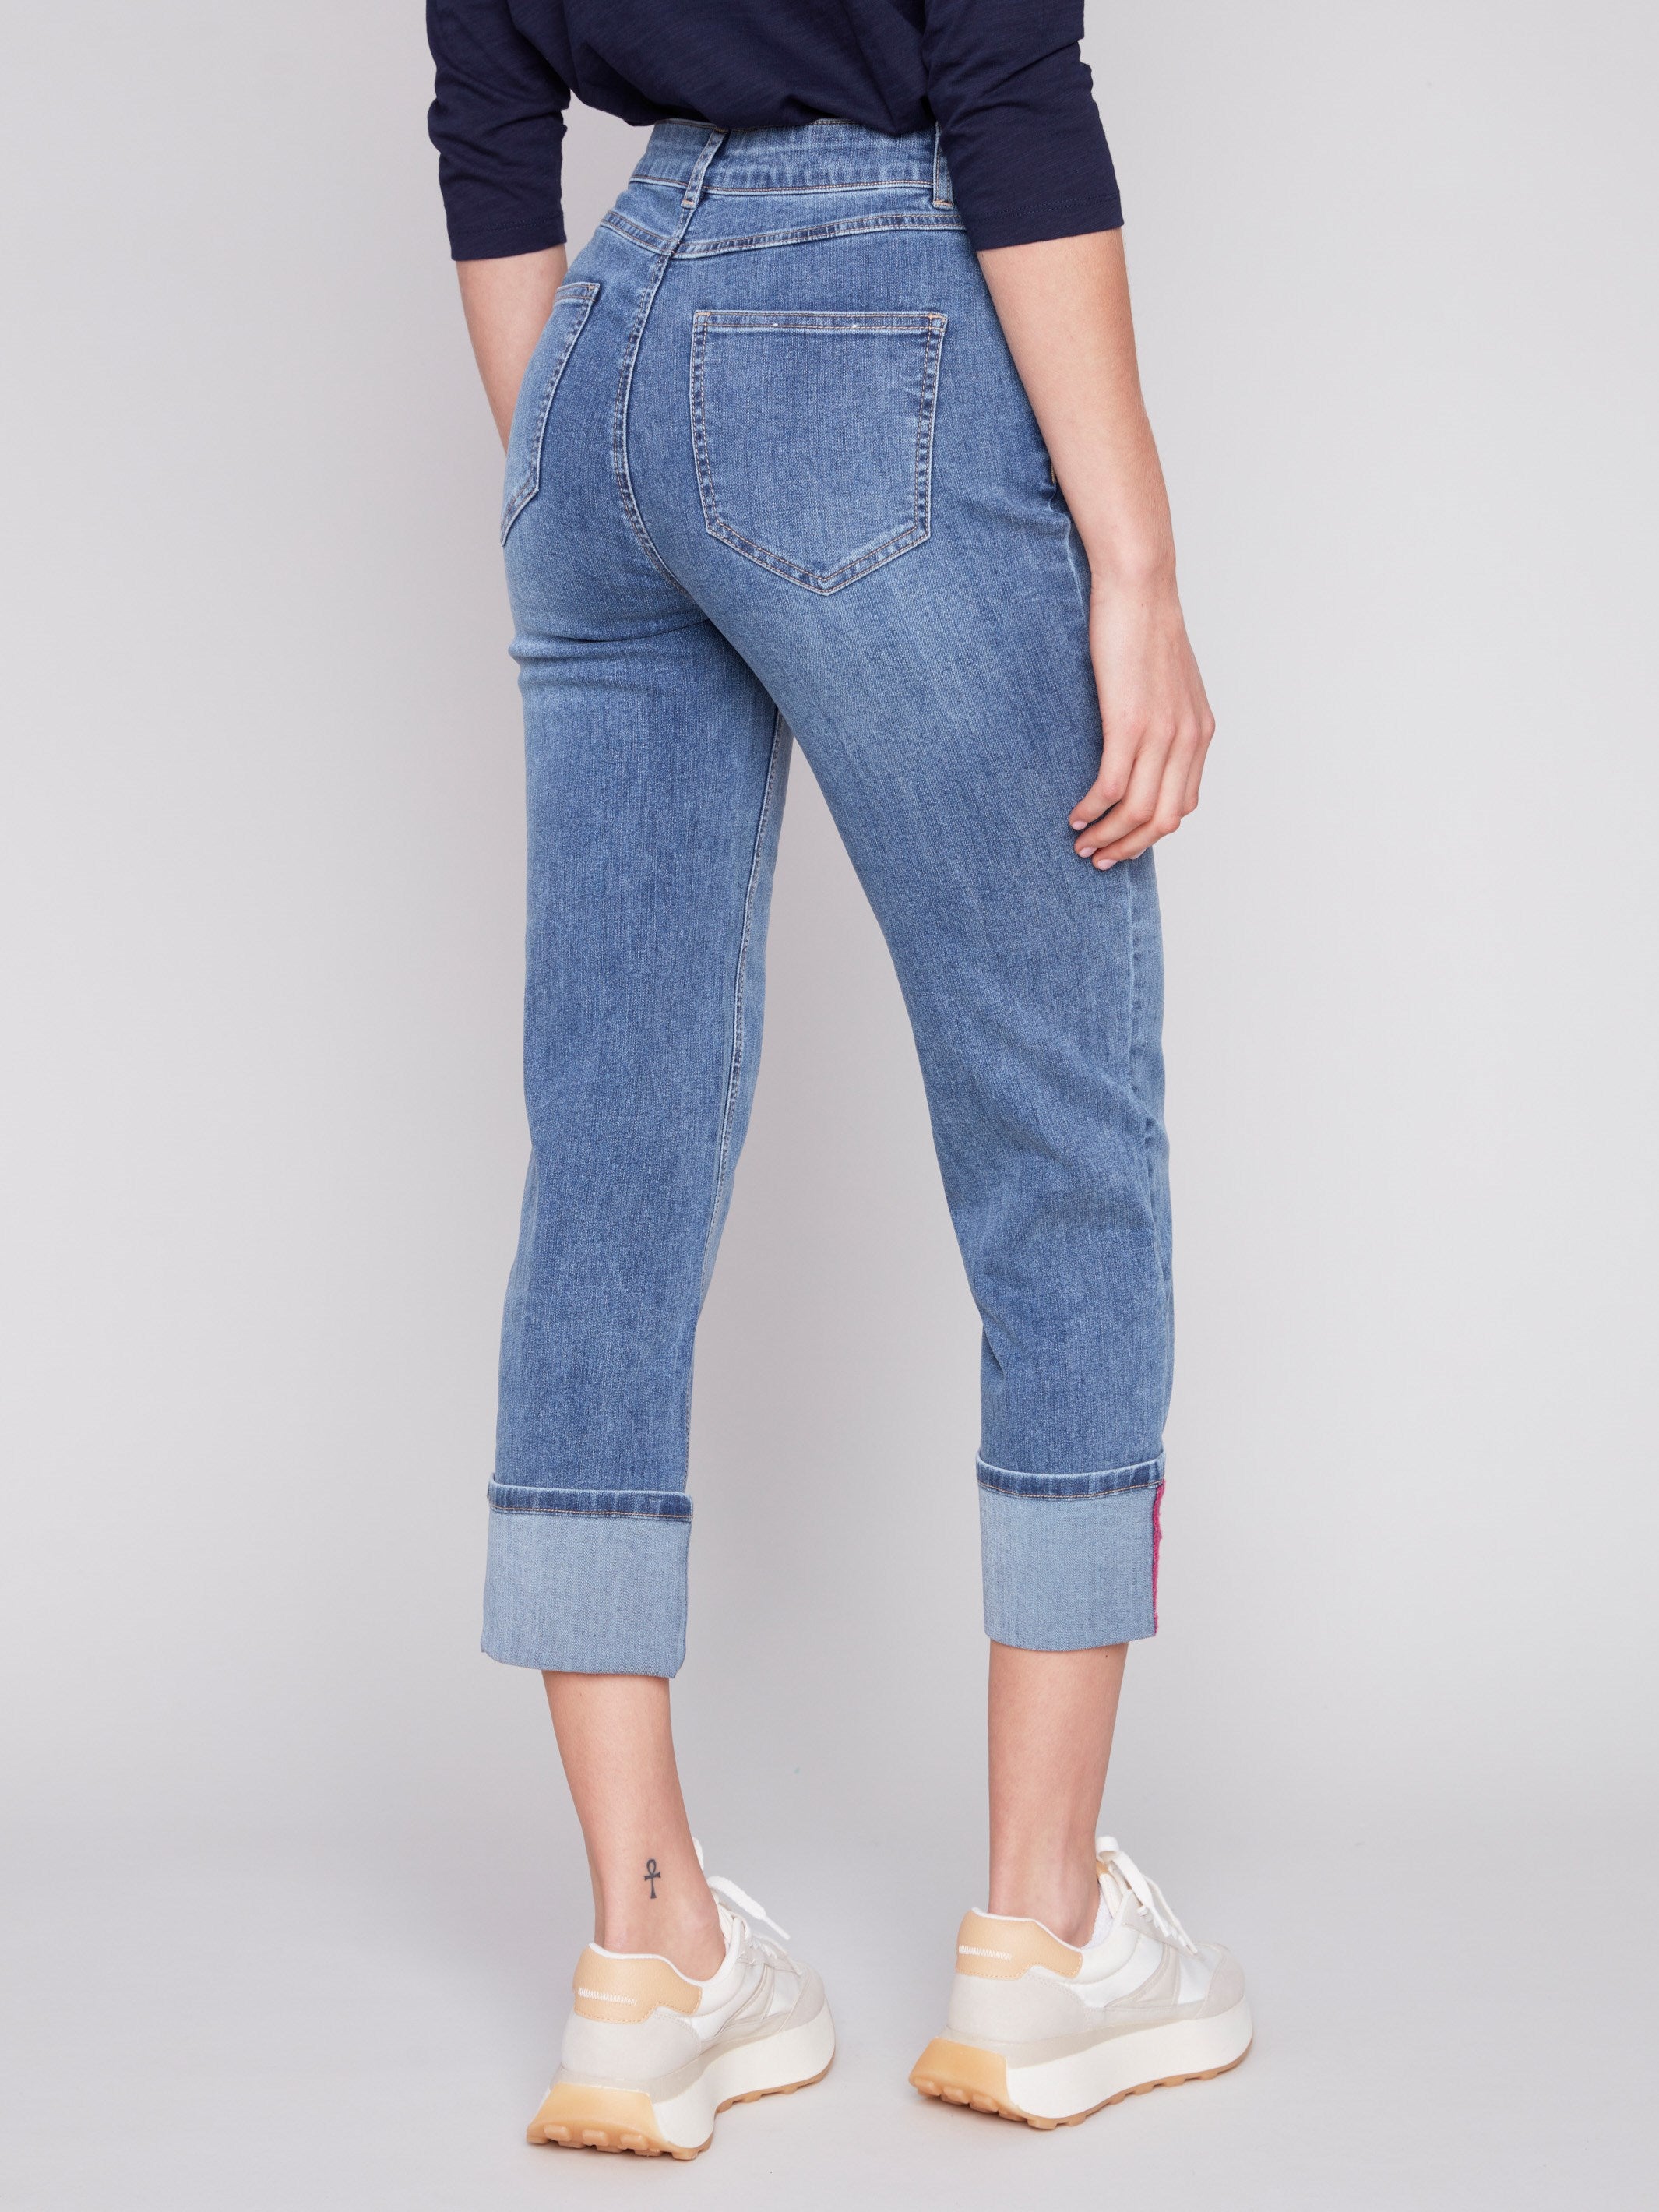 Straight Leg Jeans with Folded Cuff - Medium Blue - Charlie B Collection Canada - Image 3